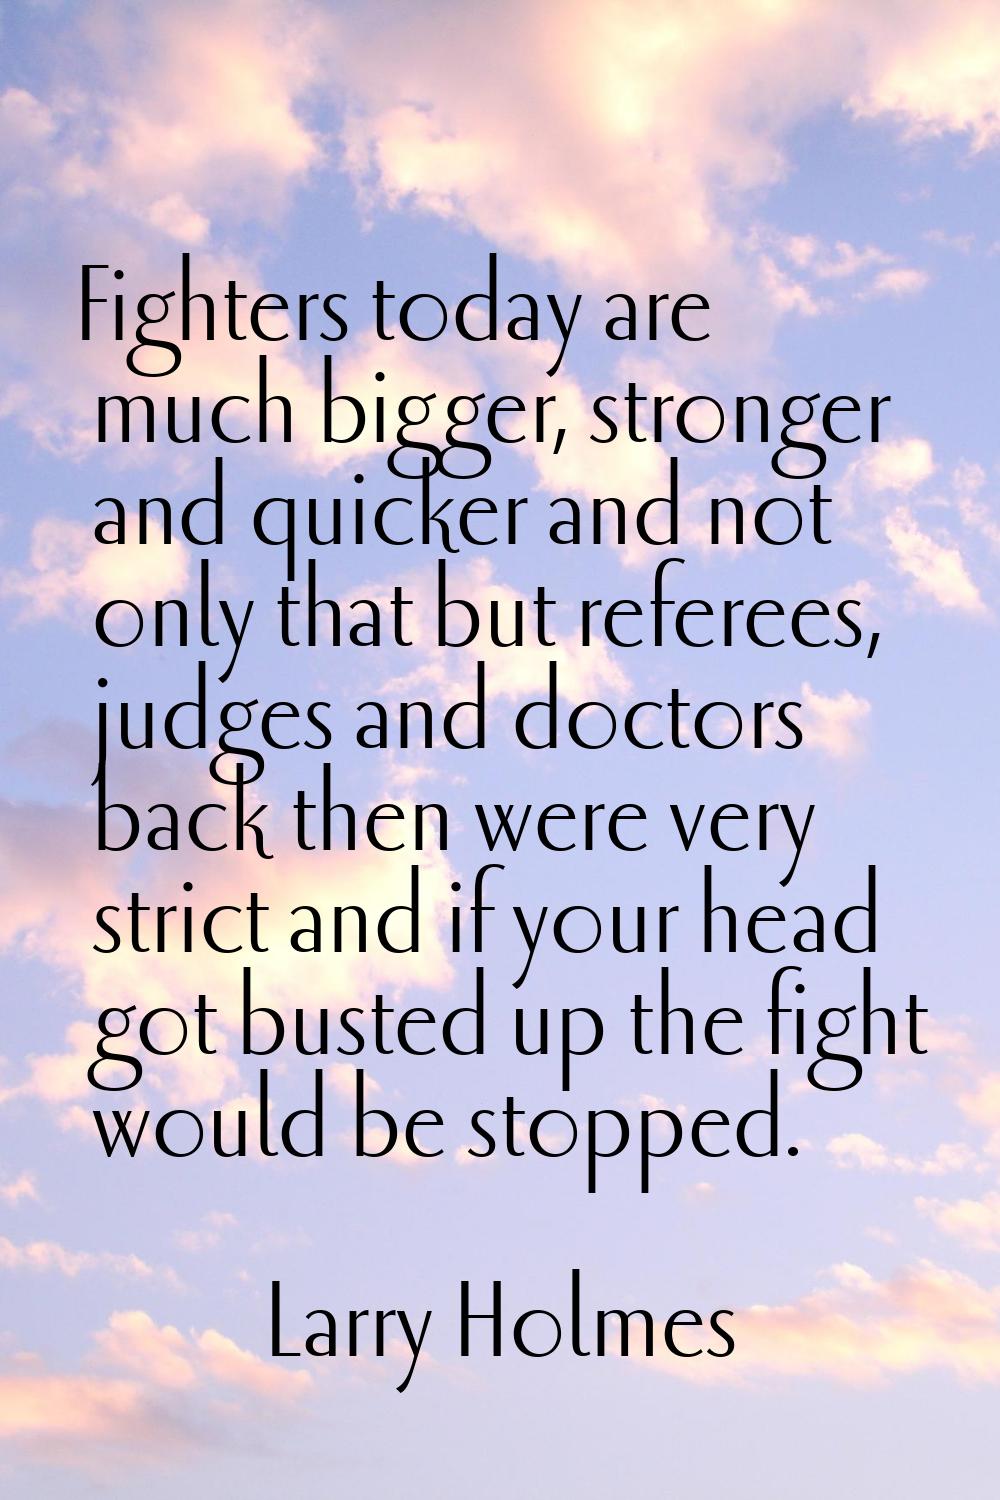 Fighters today are much bigger, stronger and quicker and not only that but referees, judges and doc